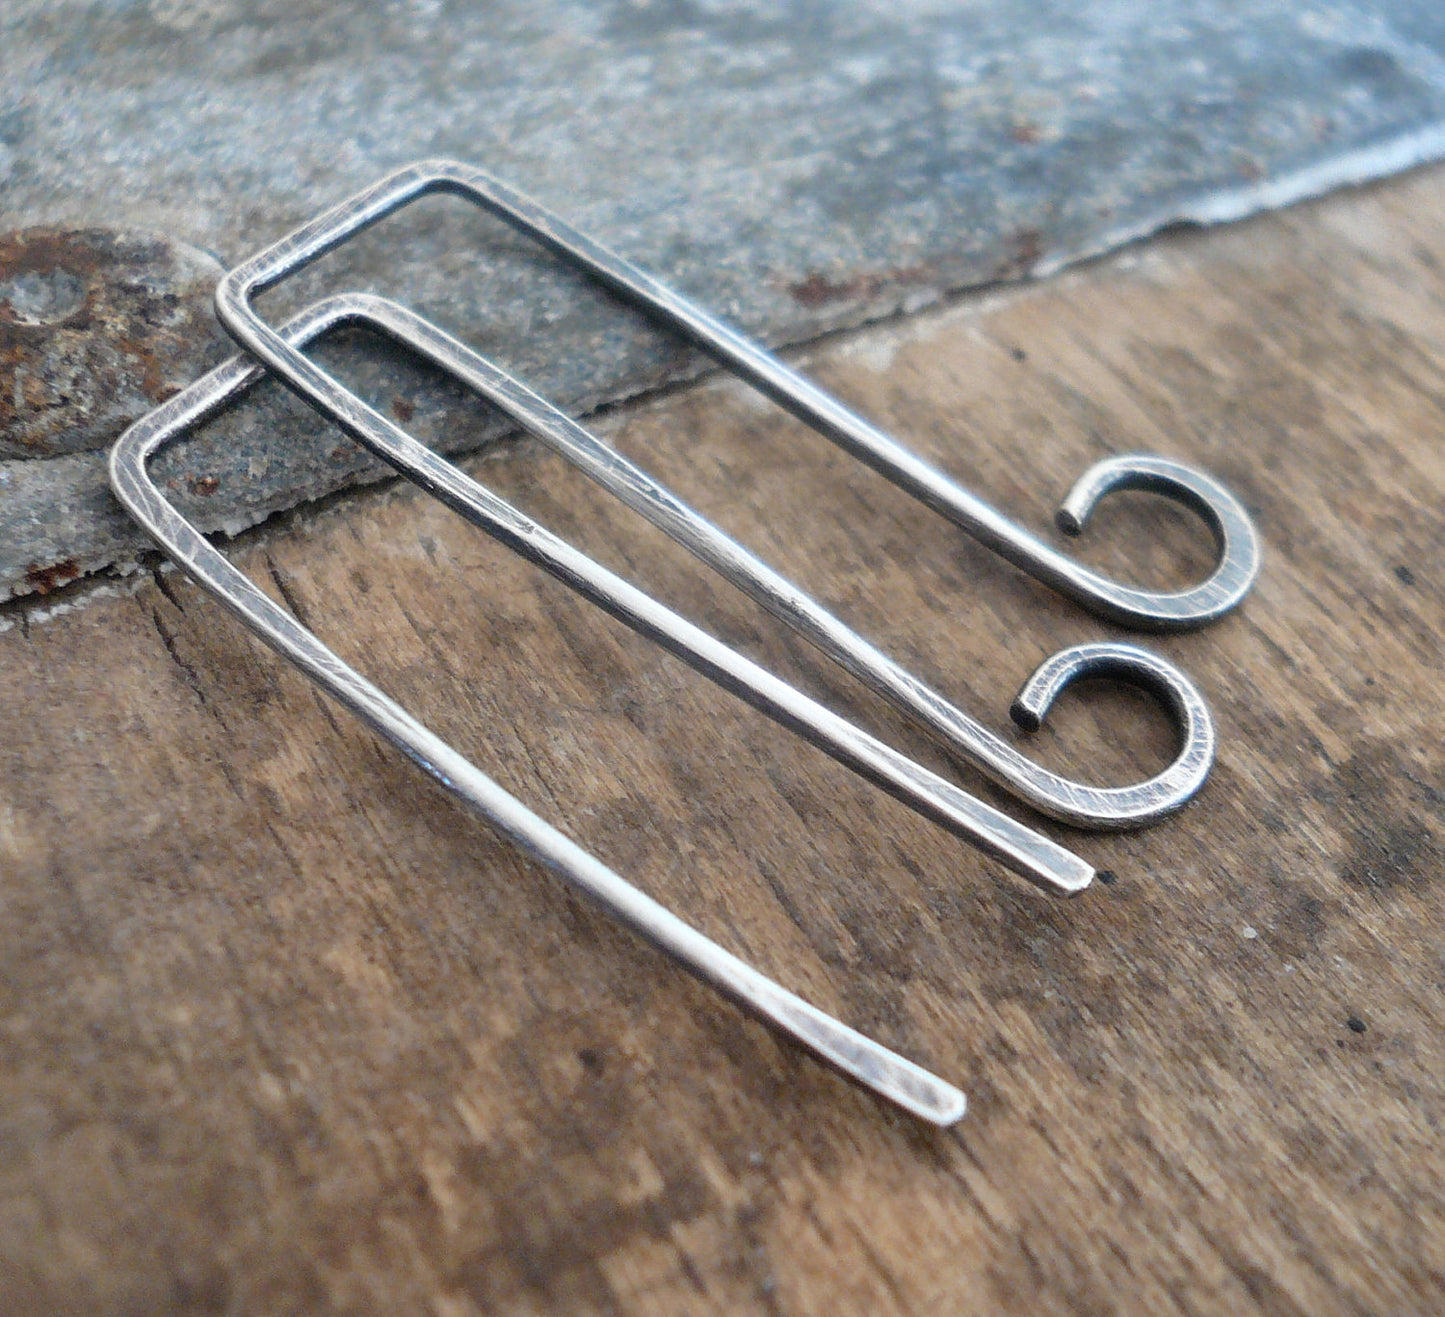 Millstone Sterling Silver Earwires - Handmade. Handforged. Oxidized and polished